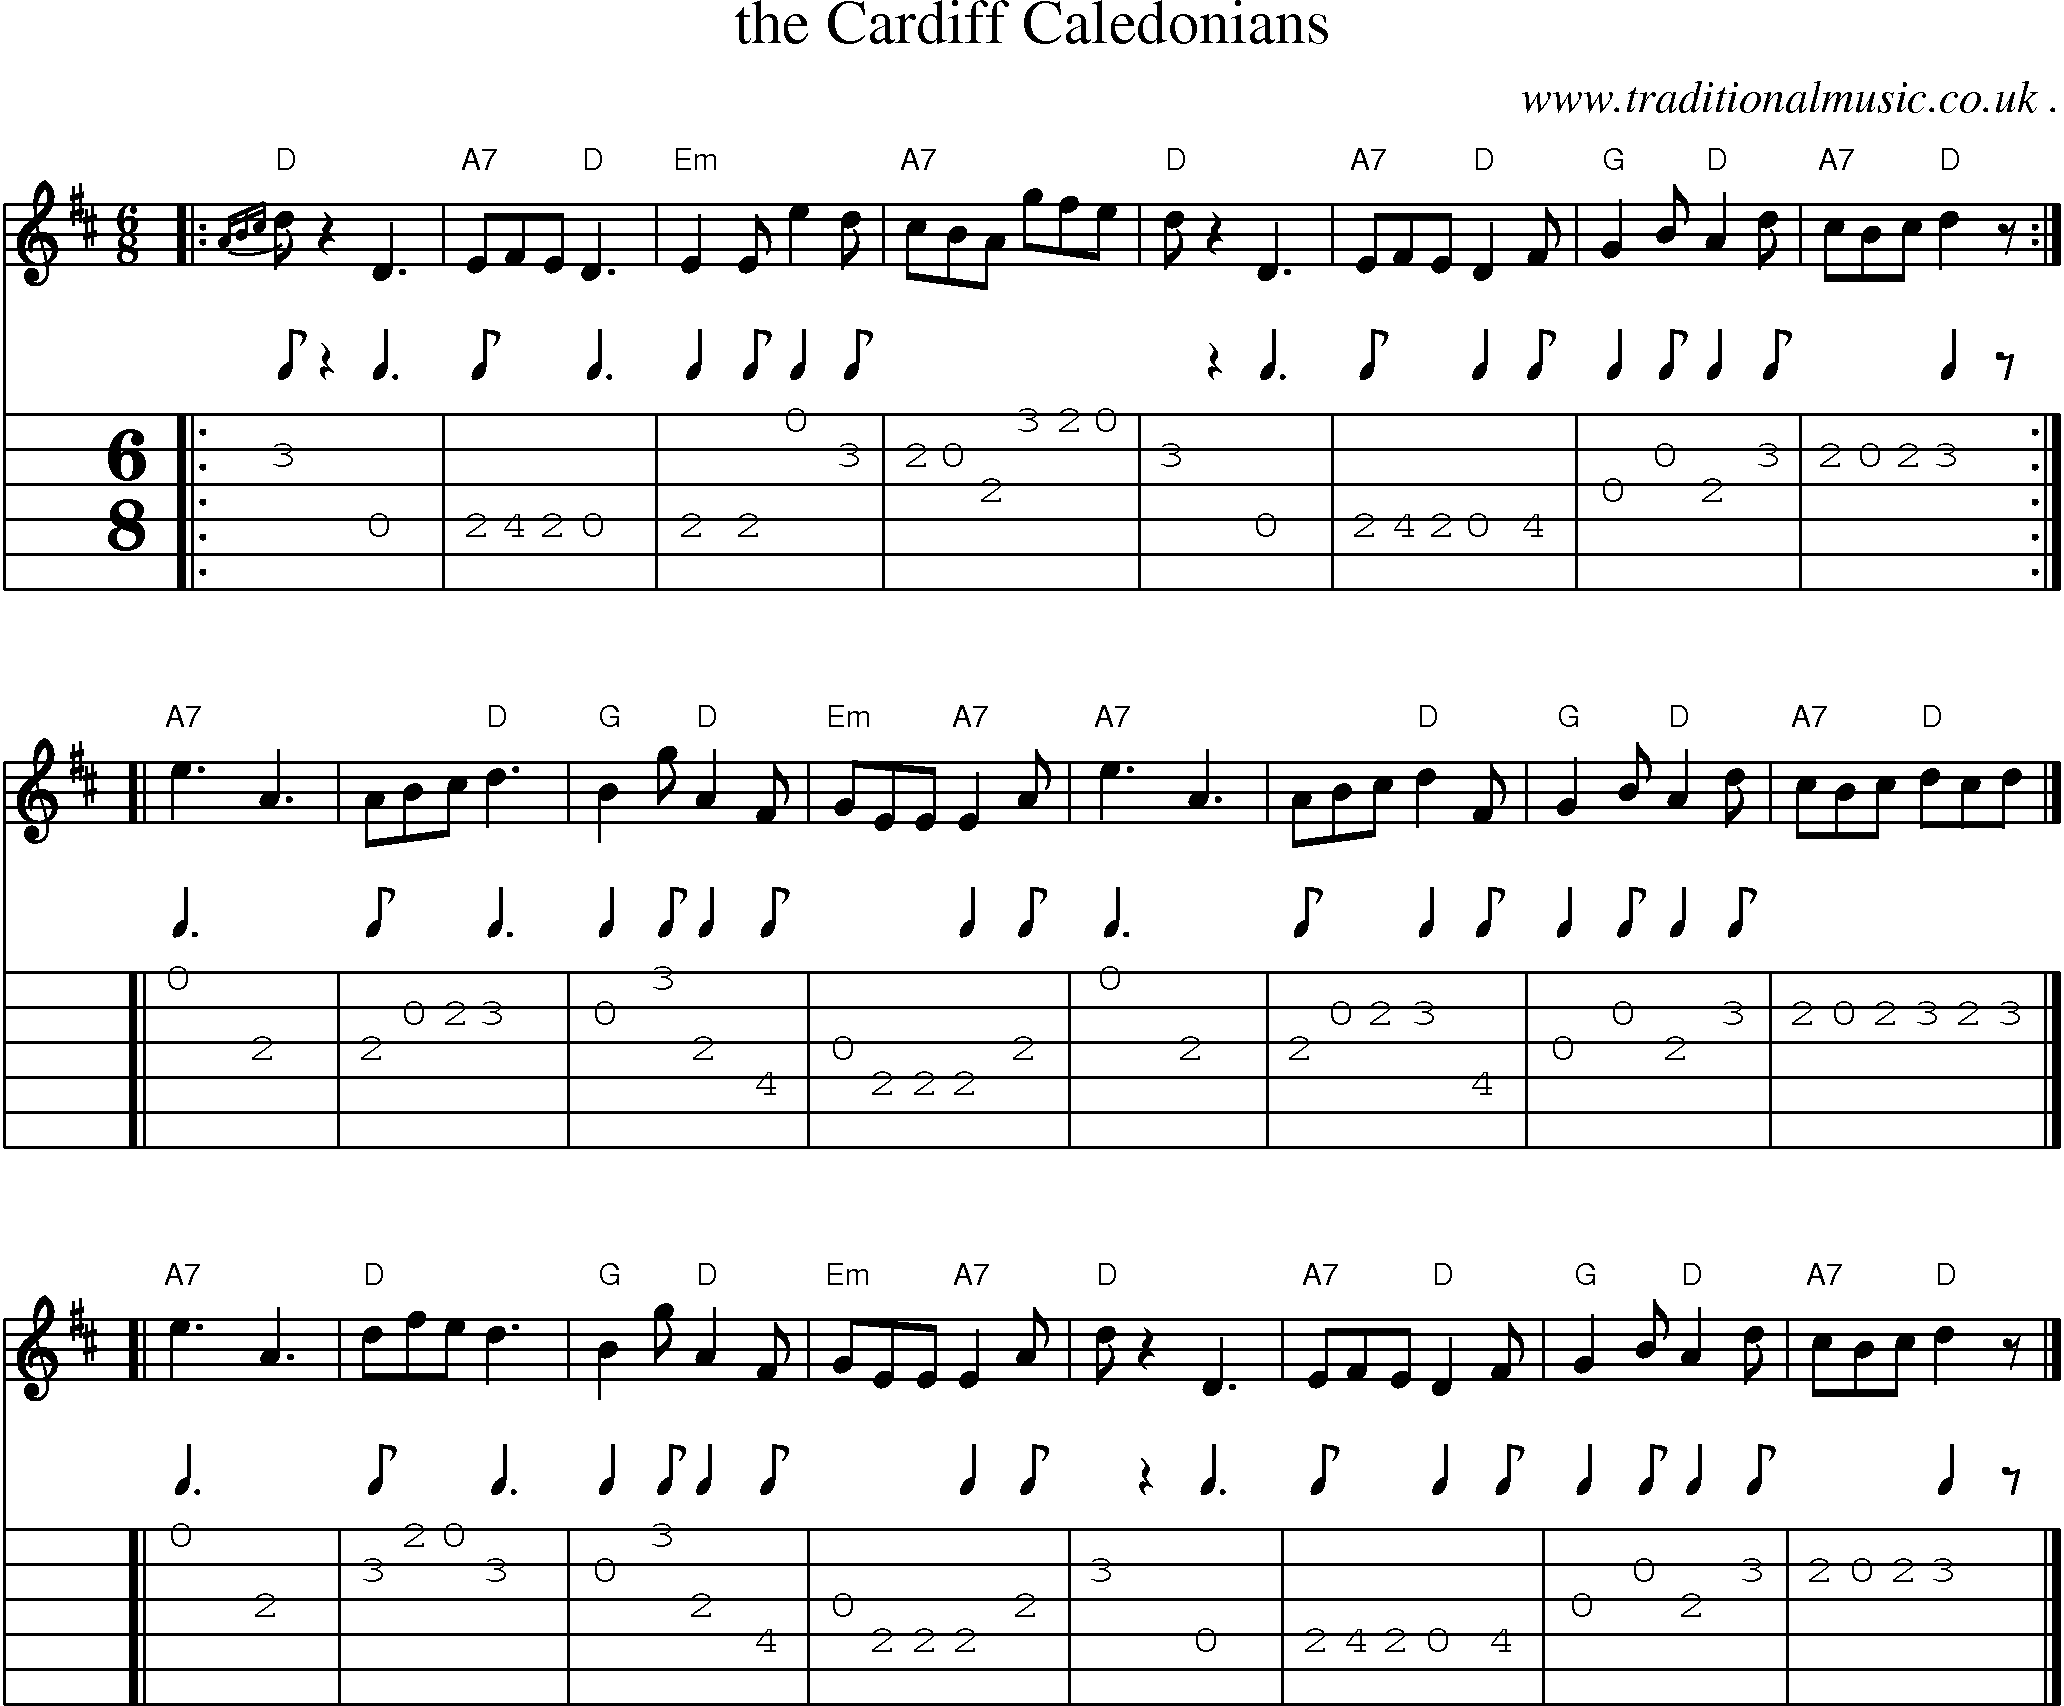 Sheet-music  score, Chords and Guitar Tabs for The Cardiff Caledonians